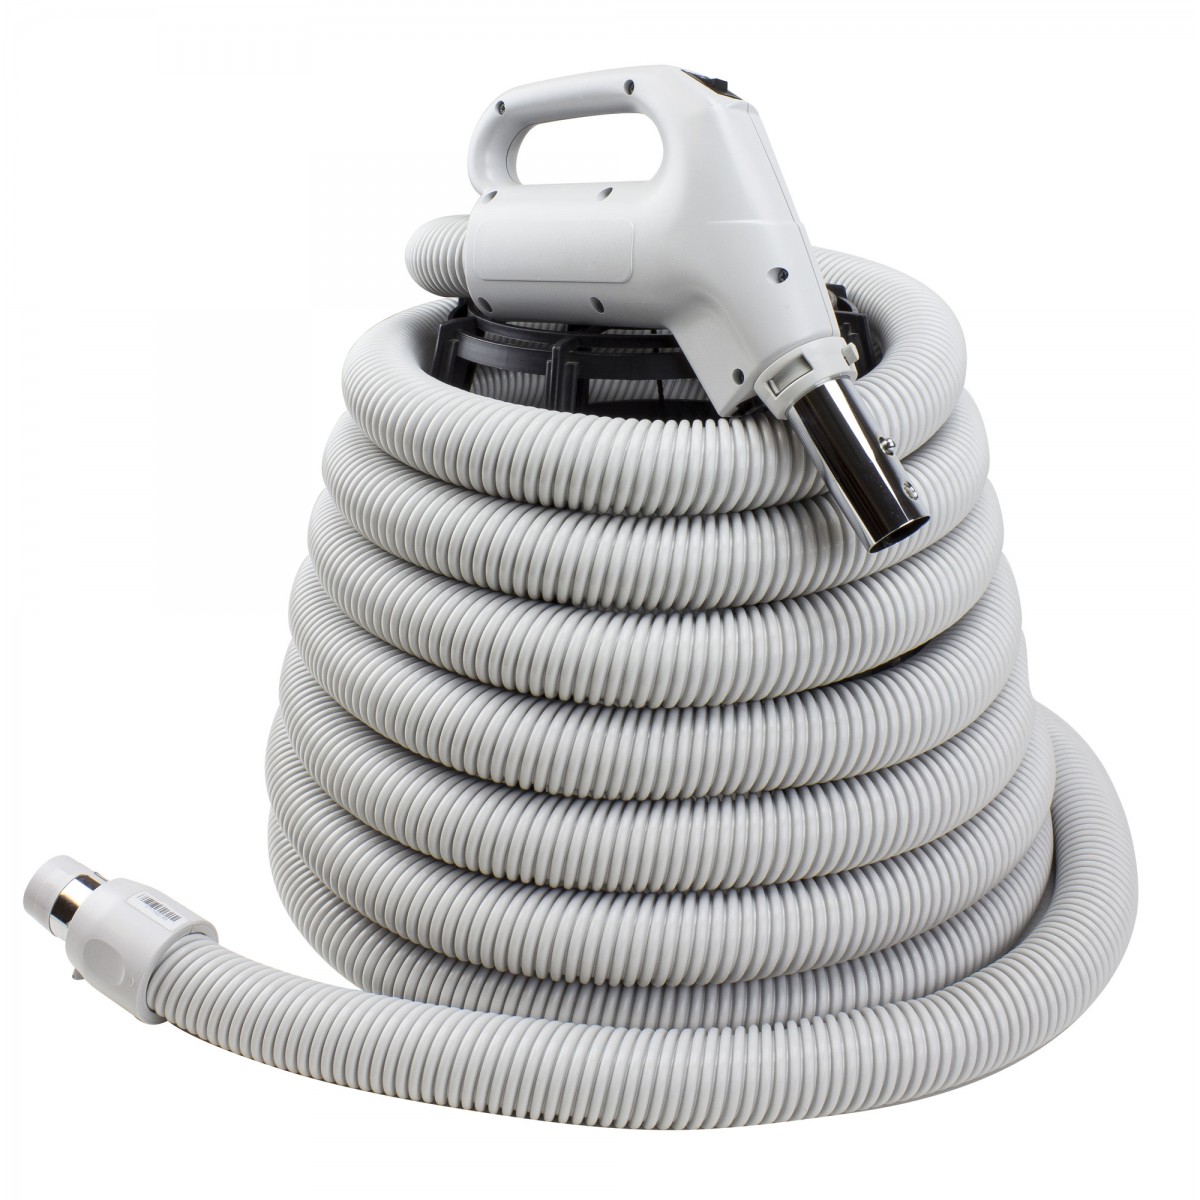 UNIVERSAL Complete Hose with Button for Central Vac -1 3/8 X 30' - Gas Pump  - Grey Plastiflex - AAA Vacuum Superstore